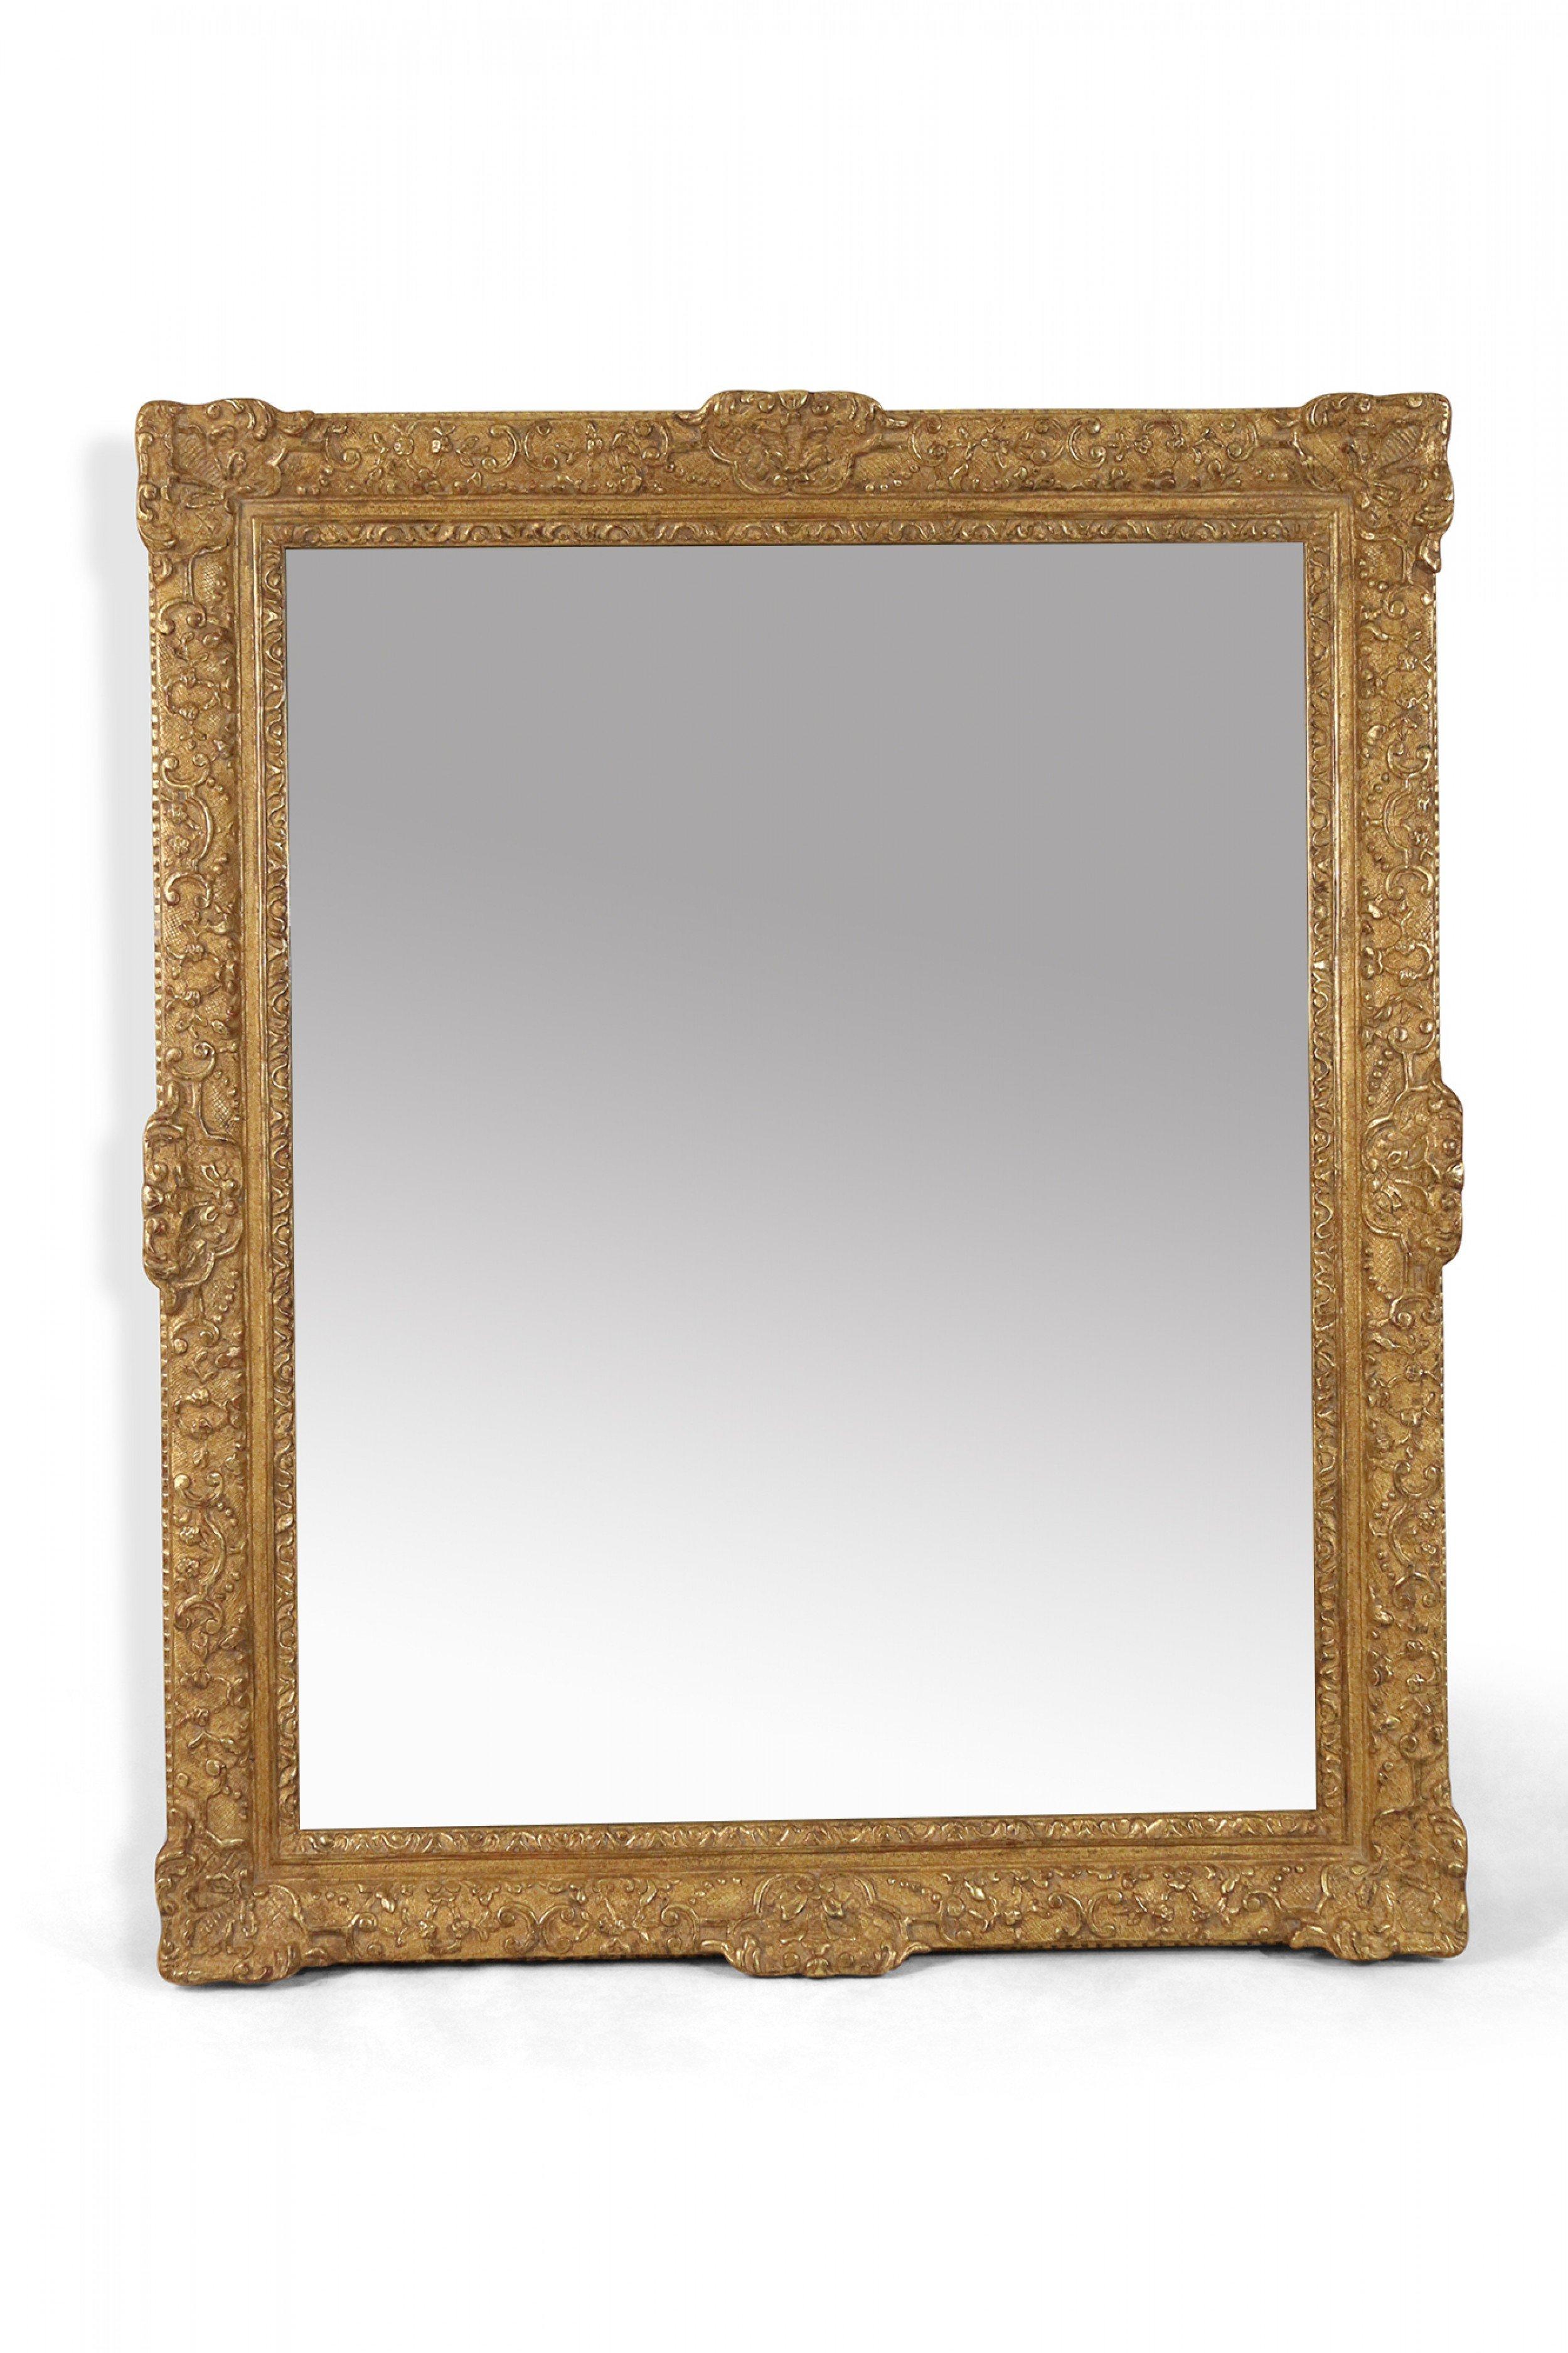 Pair of French Regence carved giltwood wall mirrors with large rectangular frames. (priced as pair)